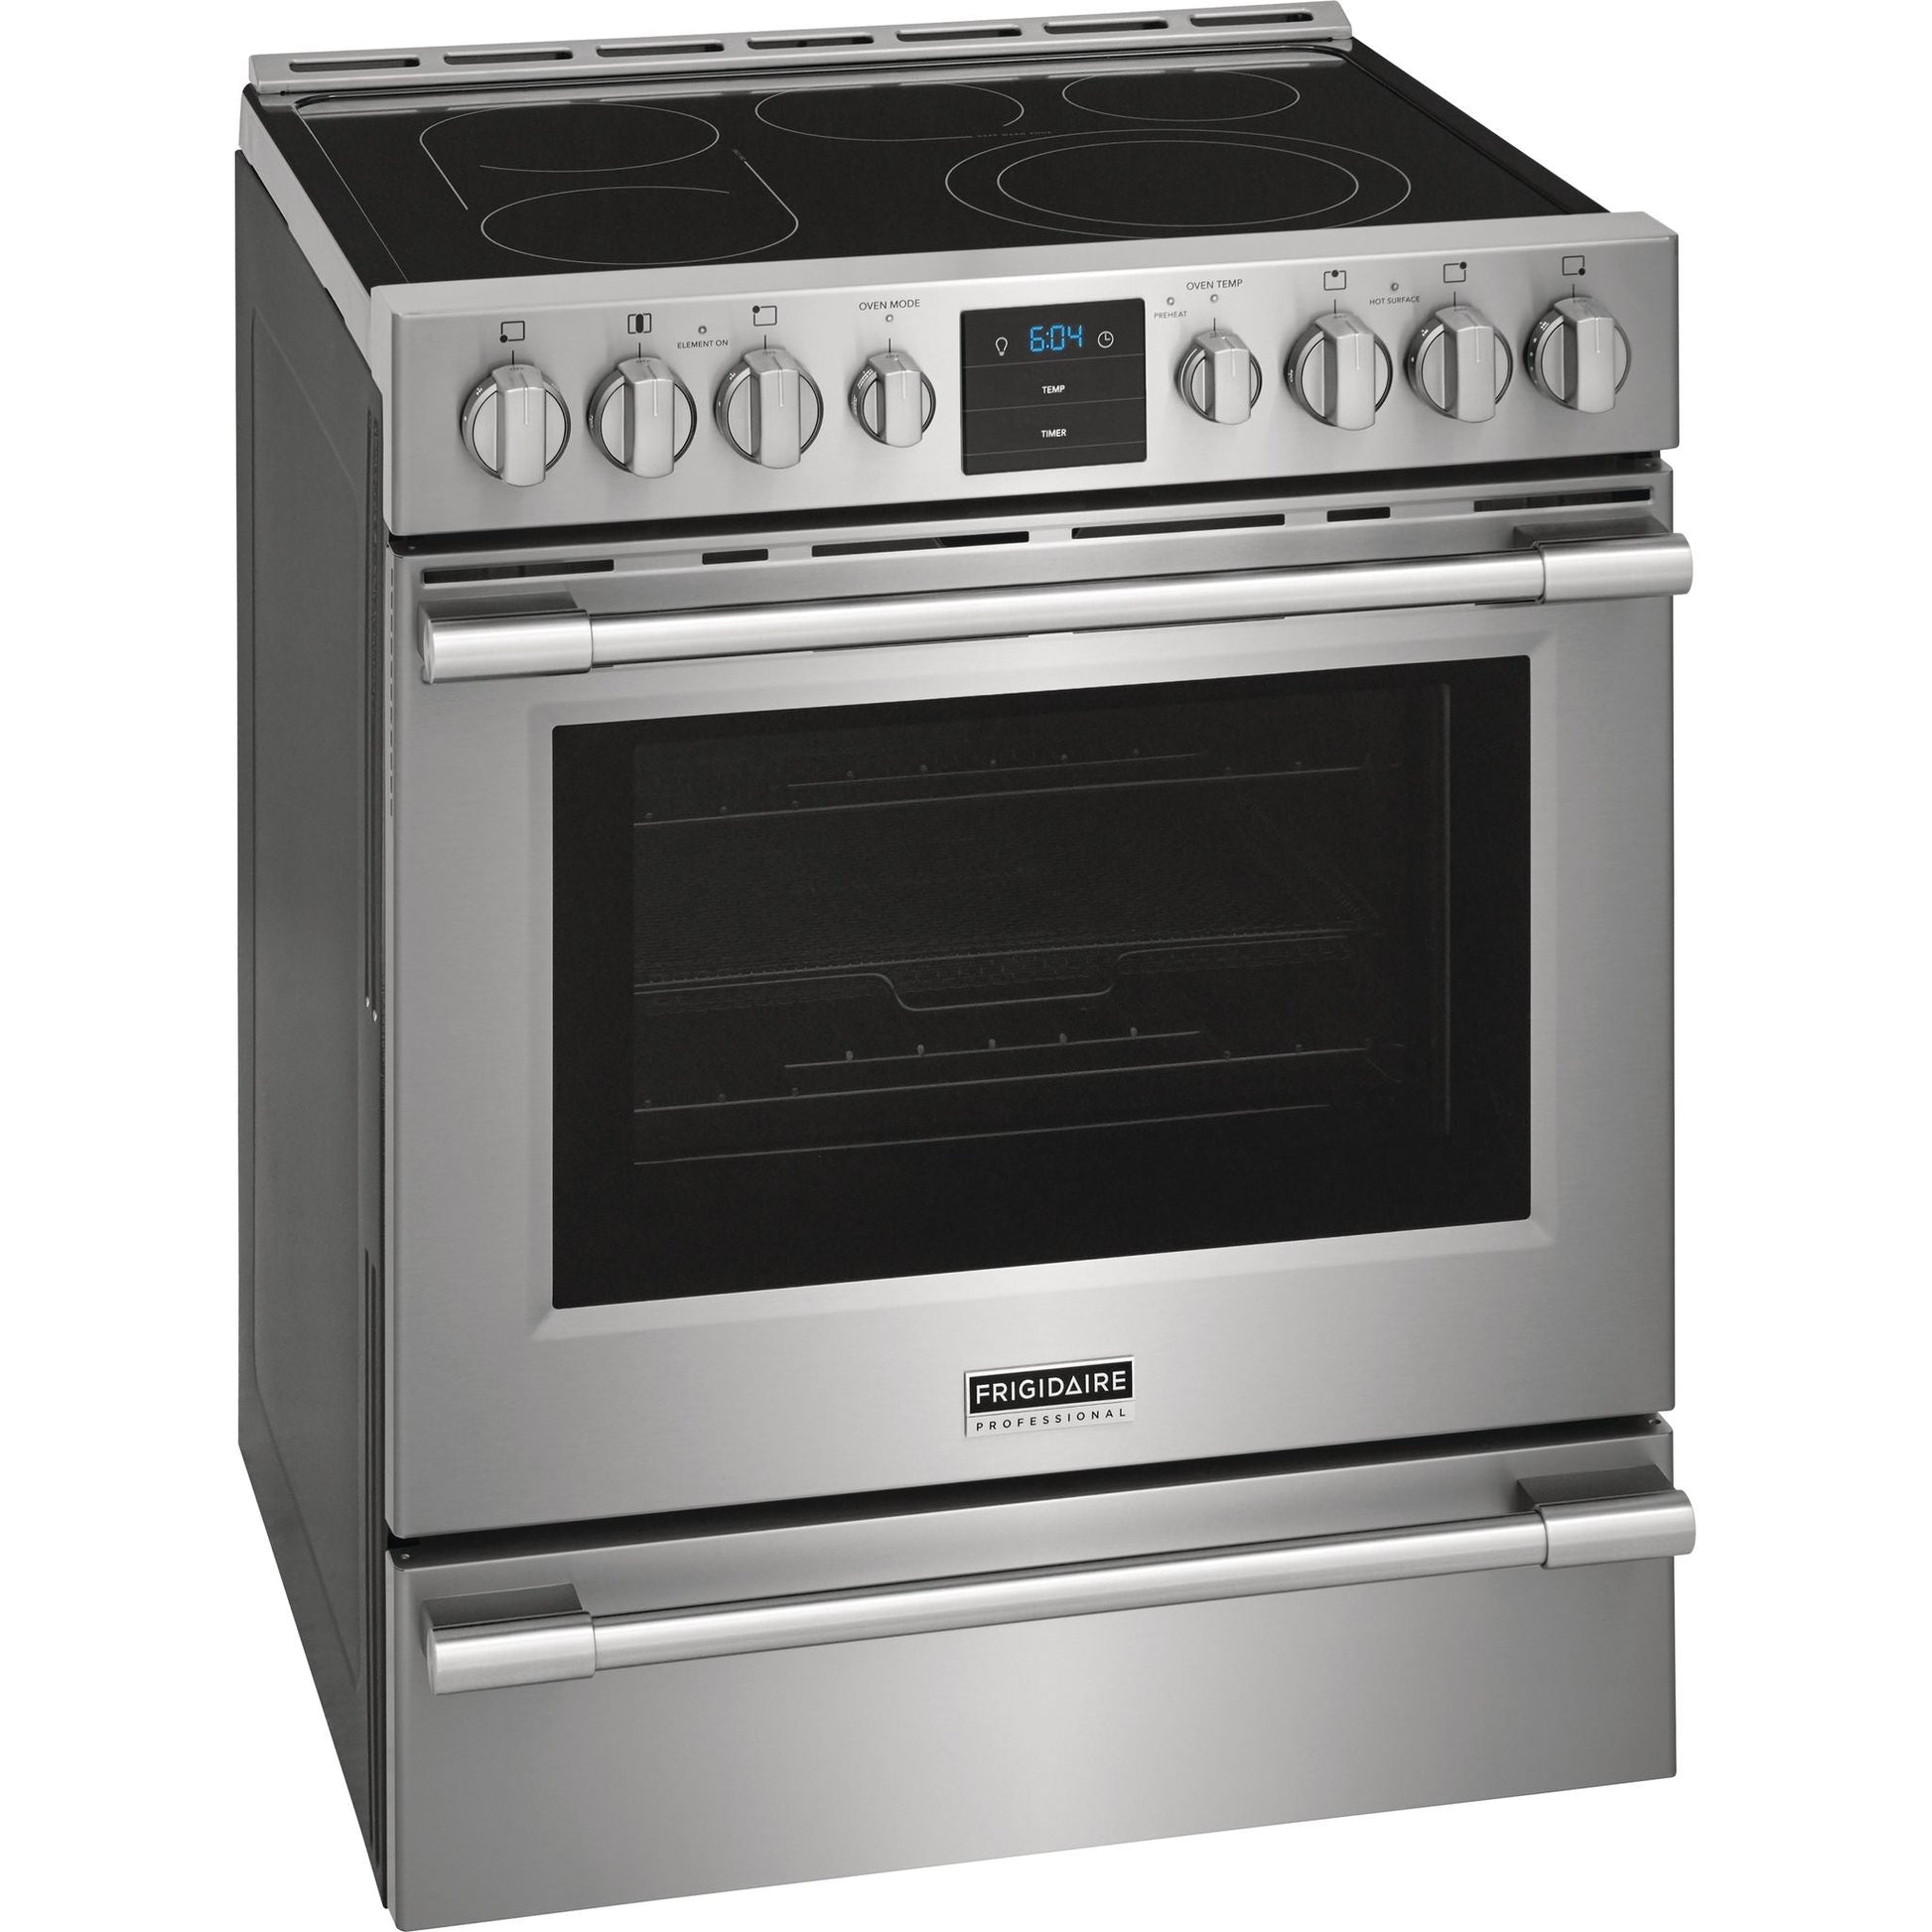 Frigidaire Professional 30" Electric Range (PCFE307CAF) - Stainless Steel